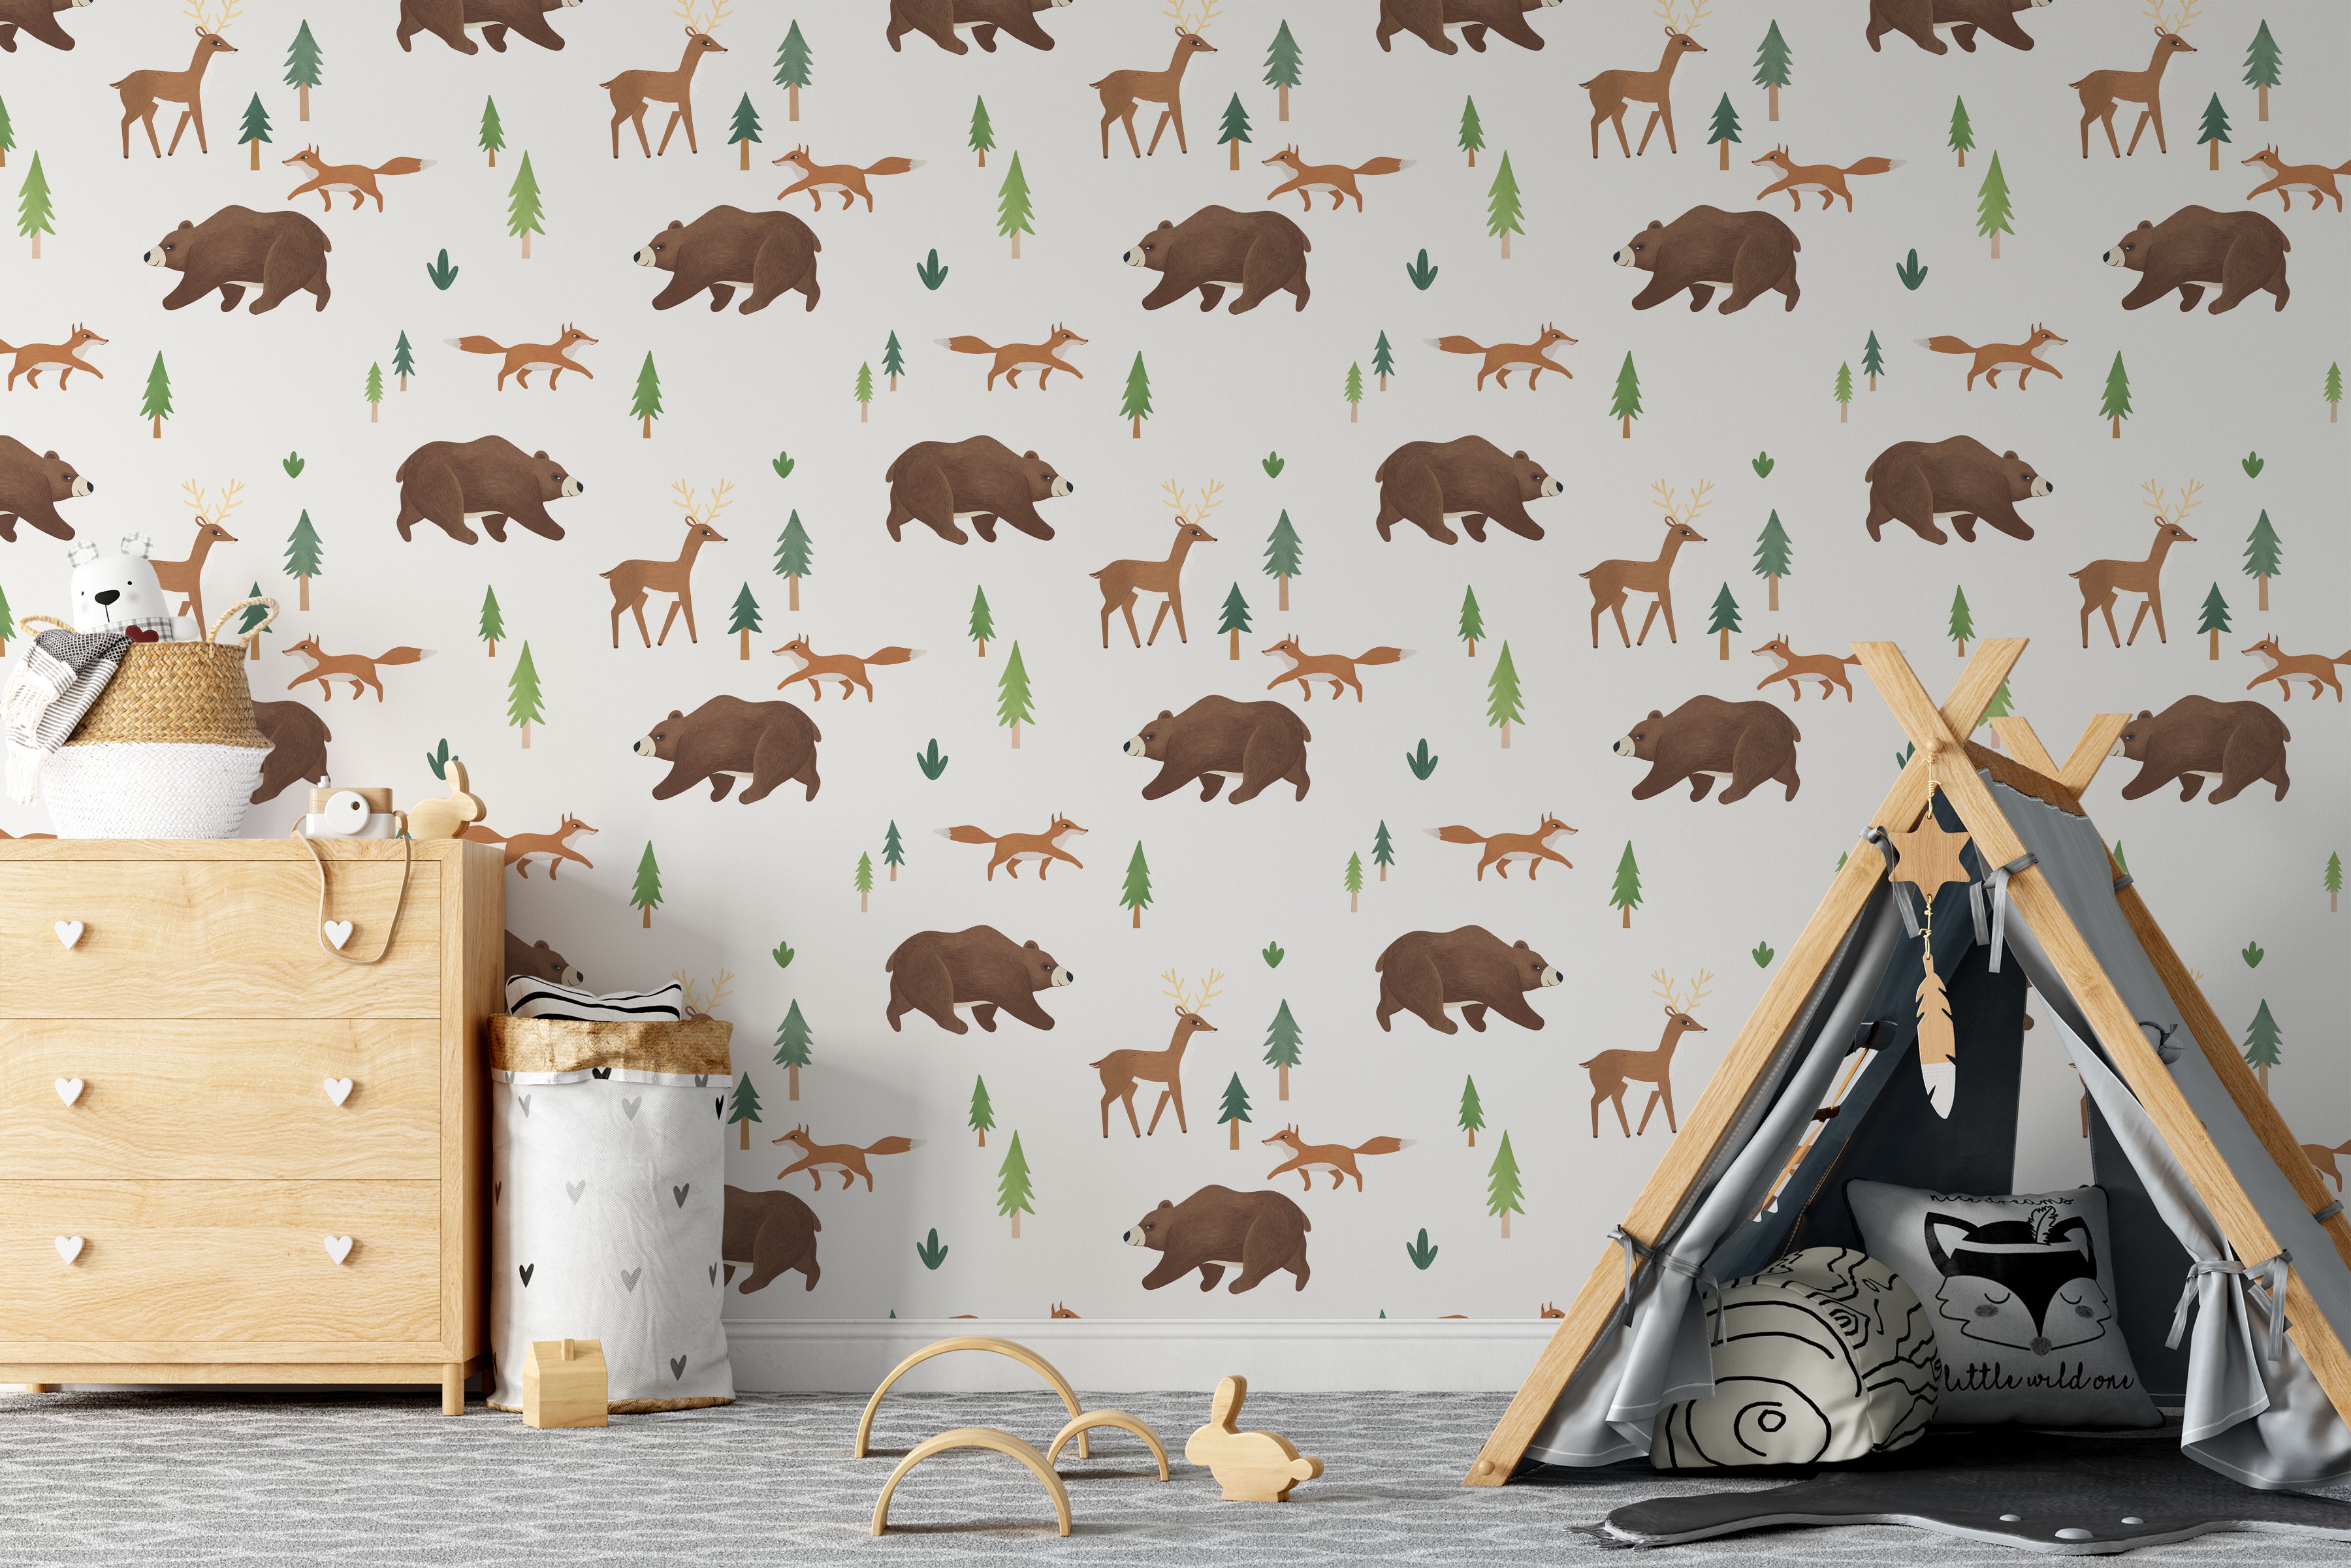 A child's room featuring a whimsical wallpaper with a repeating pattern of forest animals such as brown bears, deer, and foxes among green pine trees. The scene is complemented by a child's teepee, a wooden toy, and a light wood dresser, creating a playful and adventurous atmosphere.